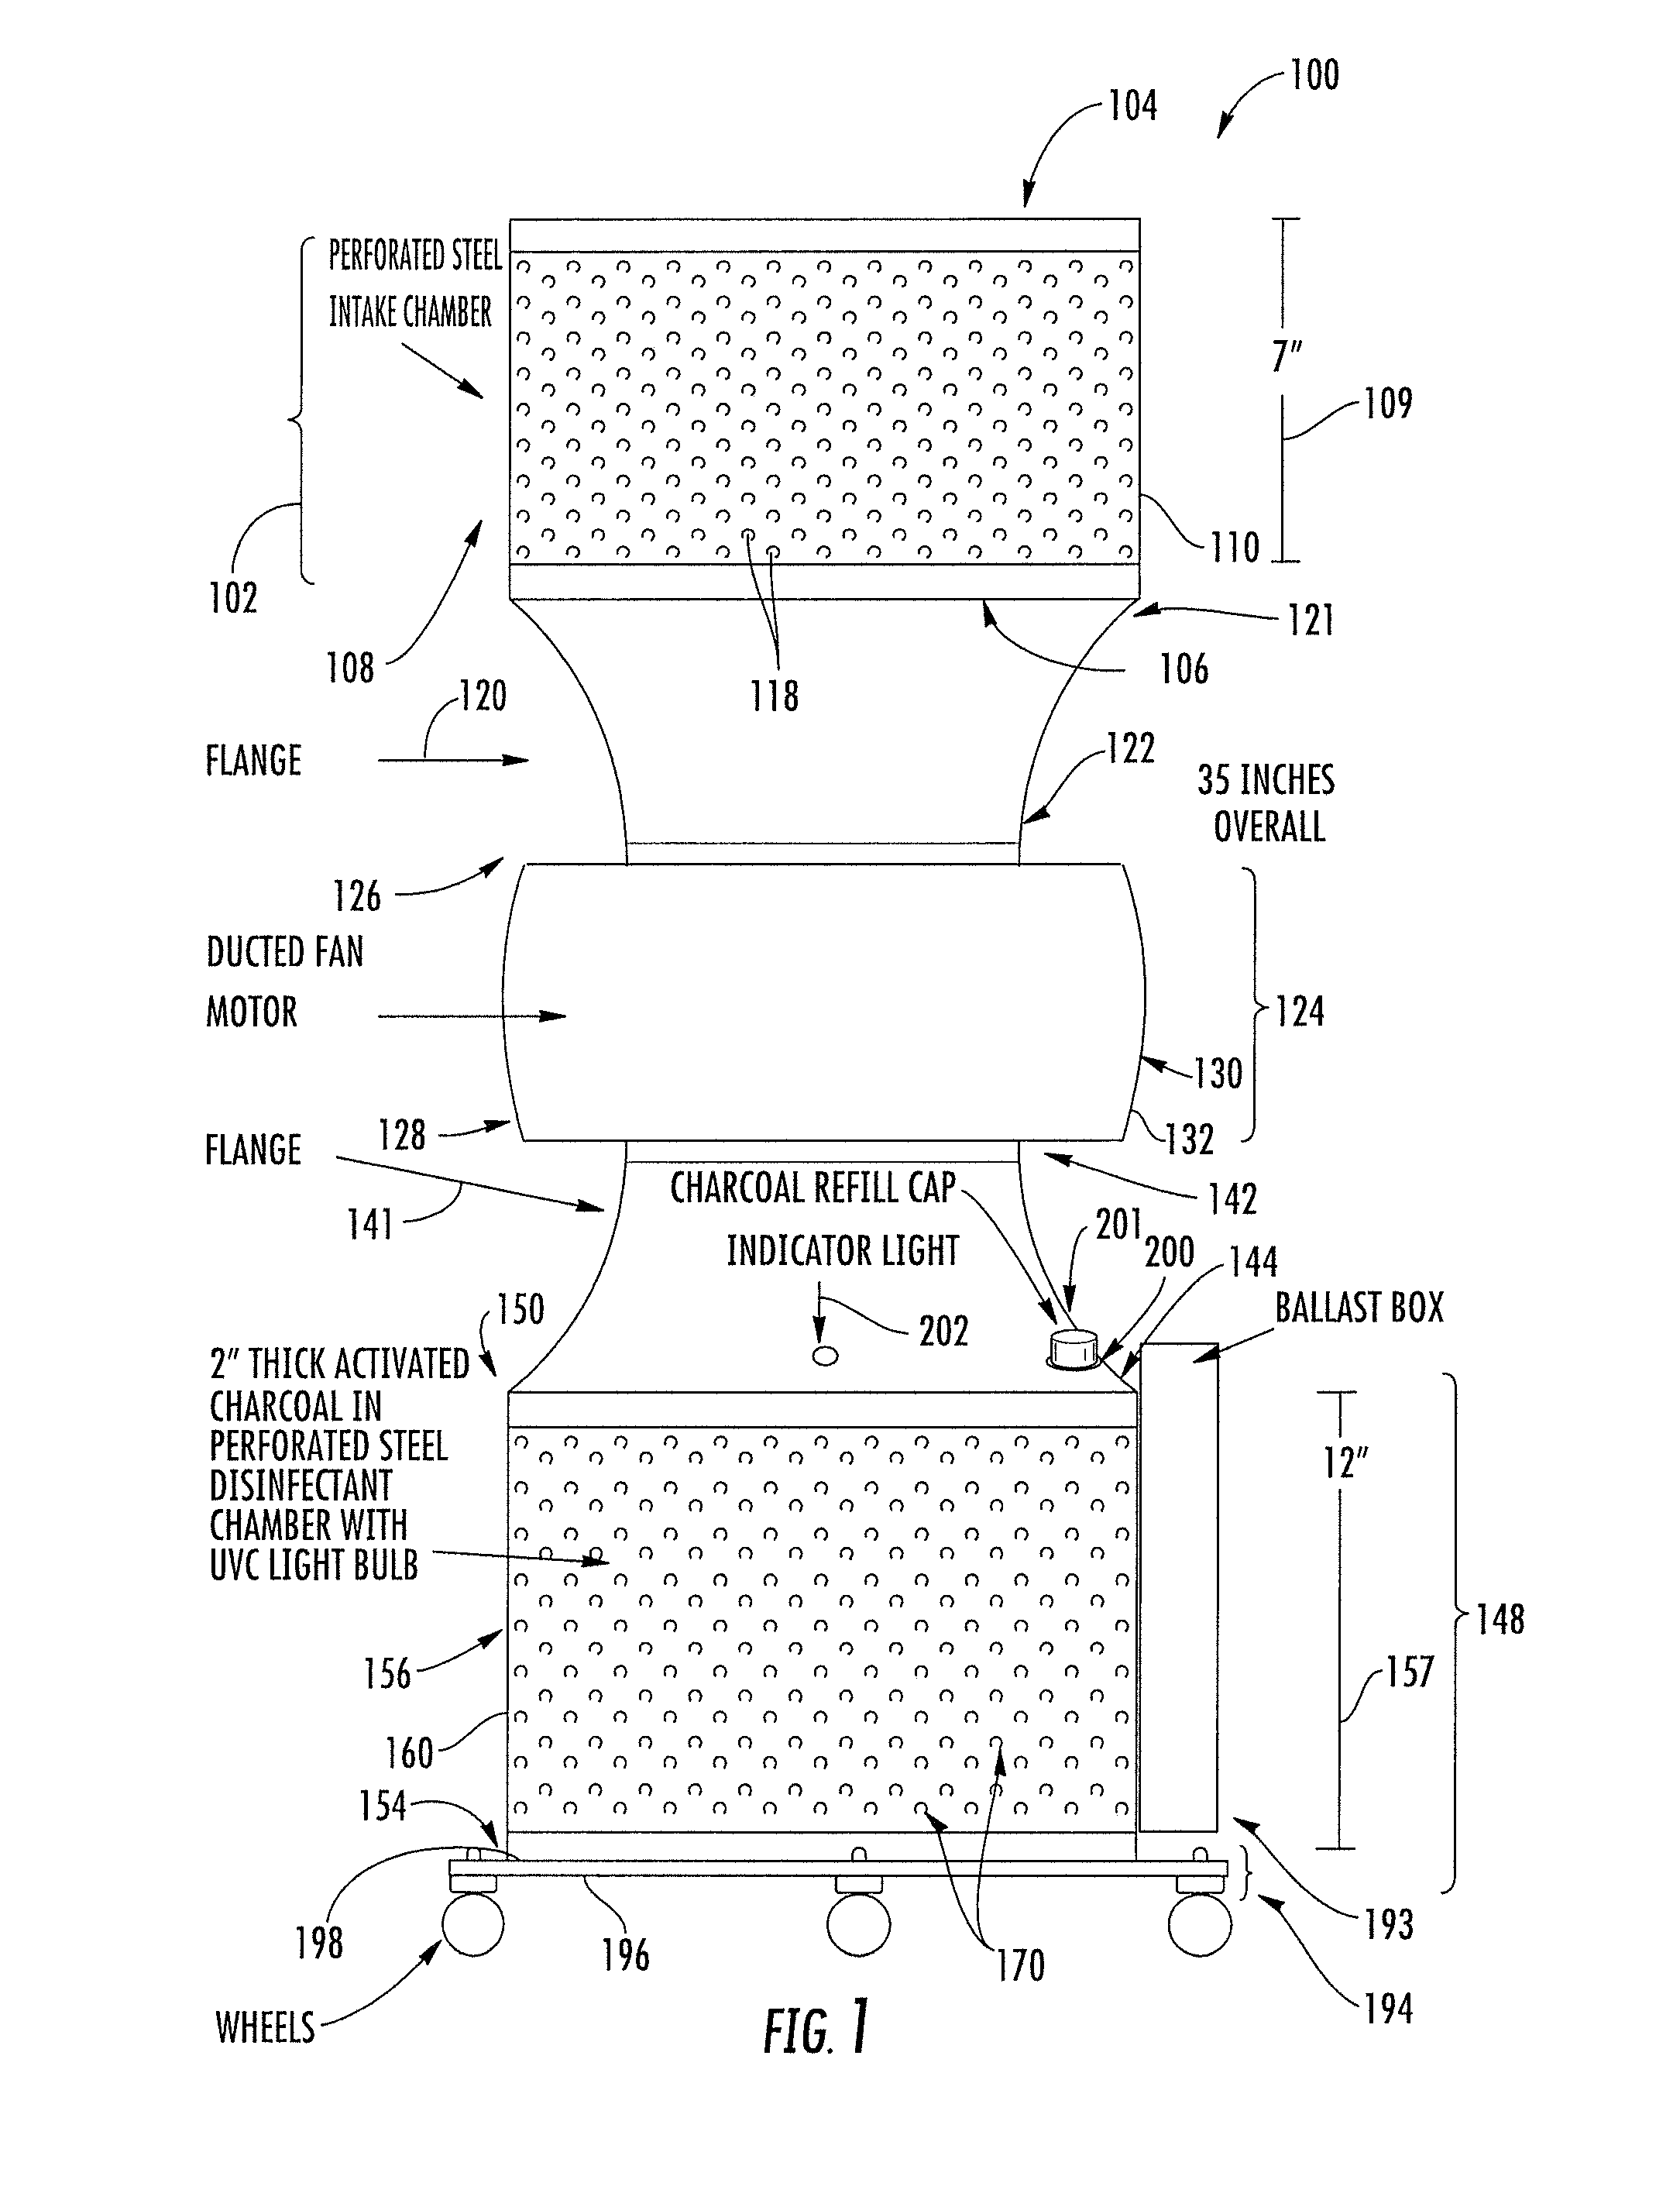 Air purification assembly and method of using same